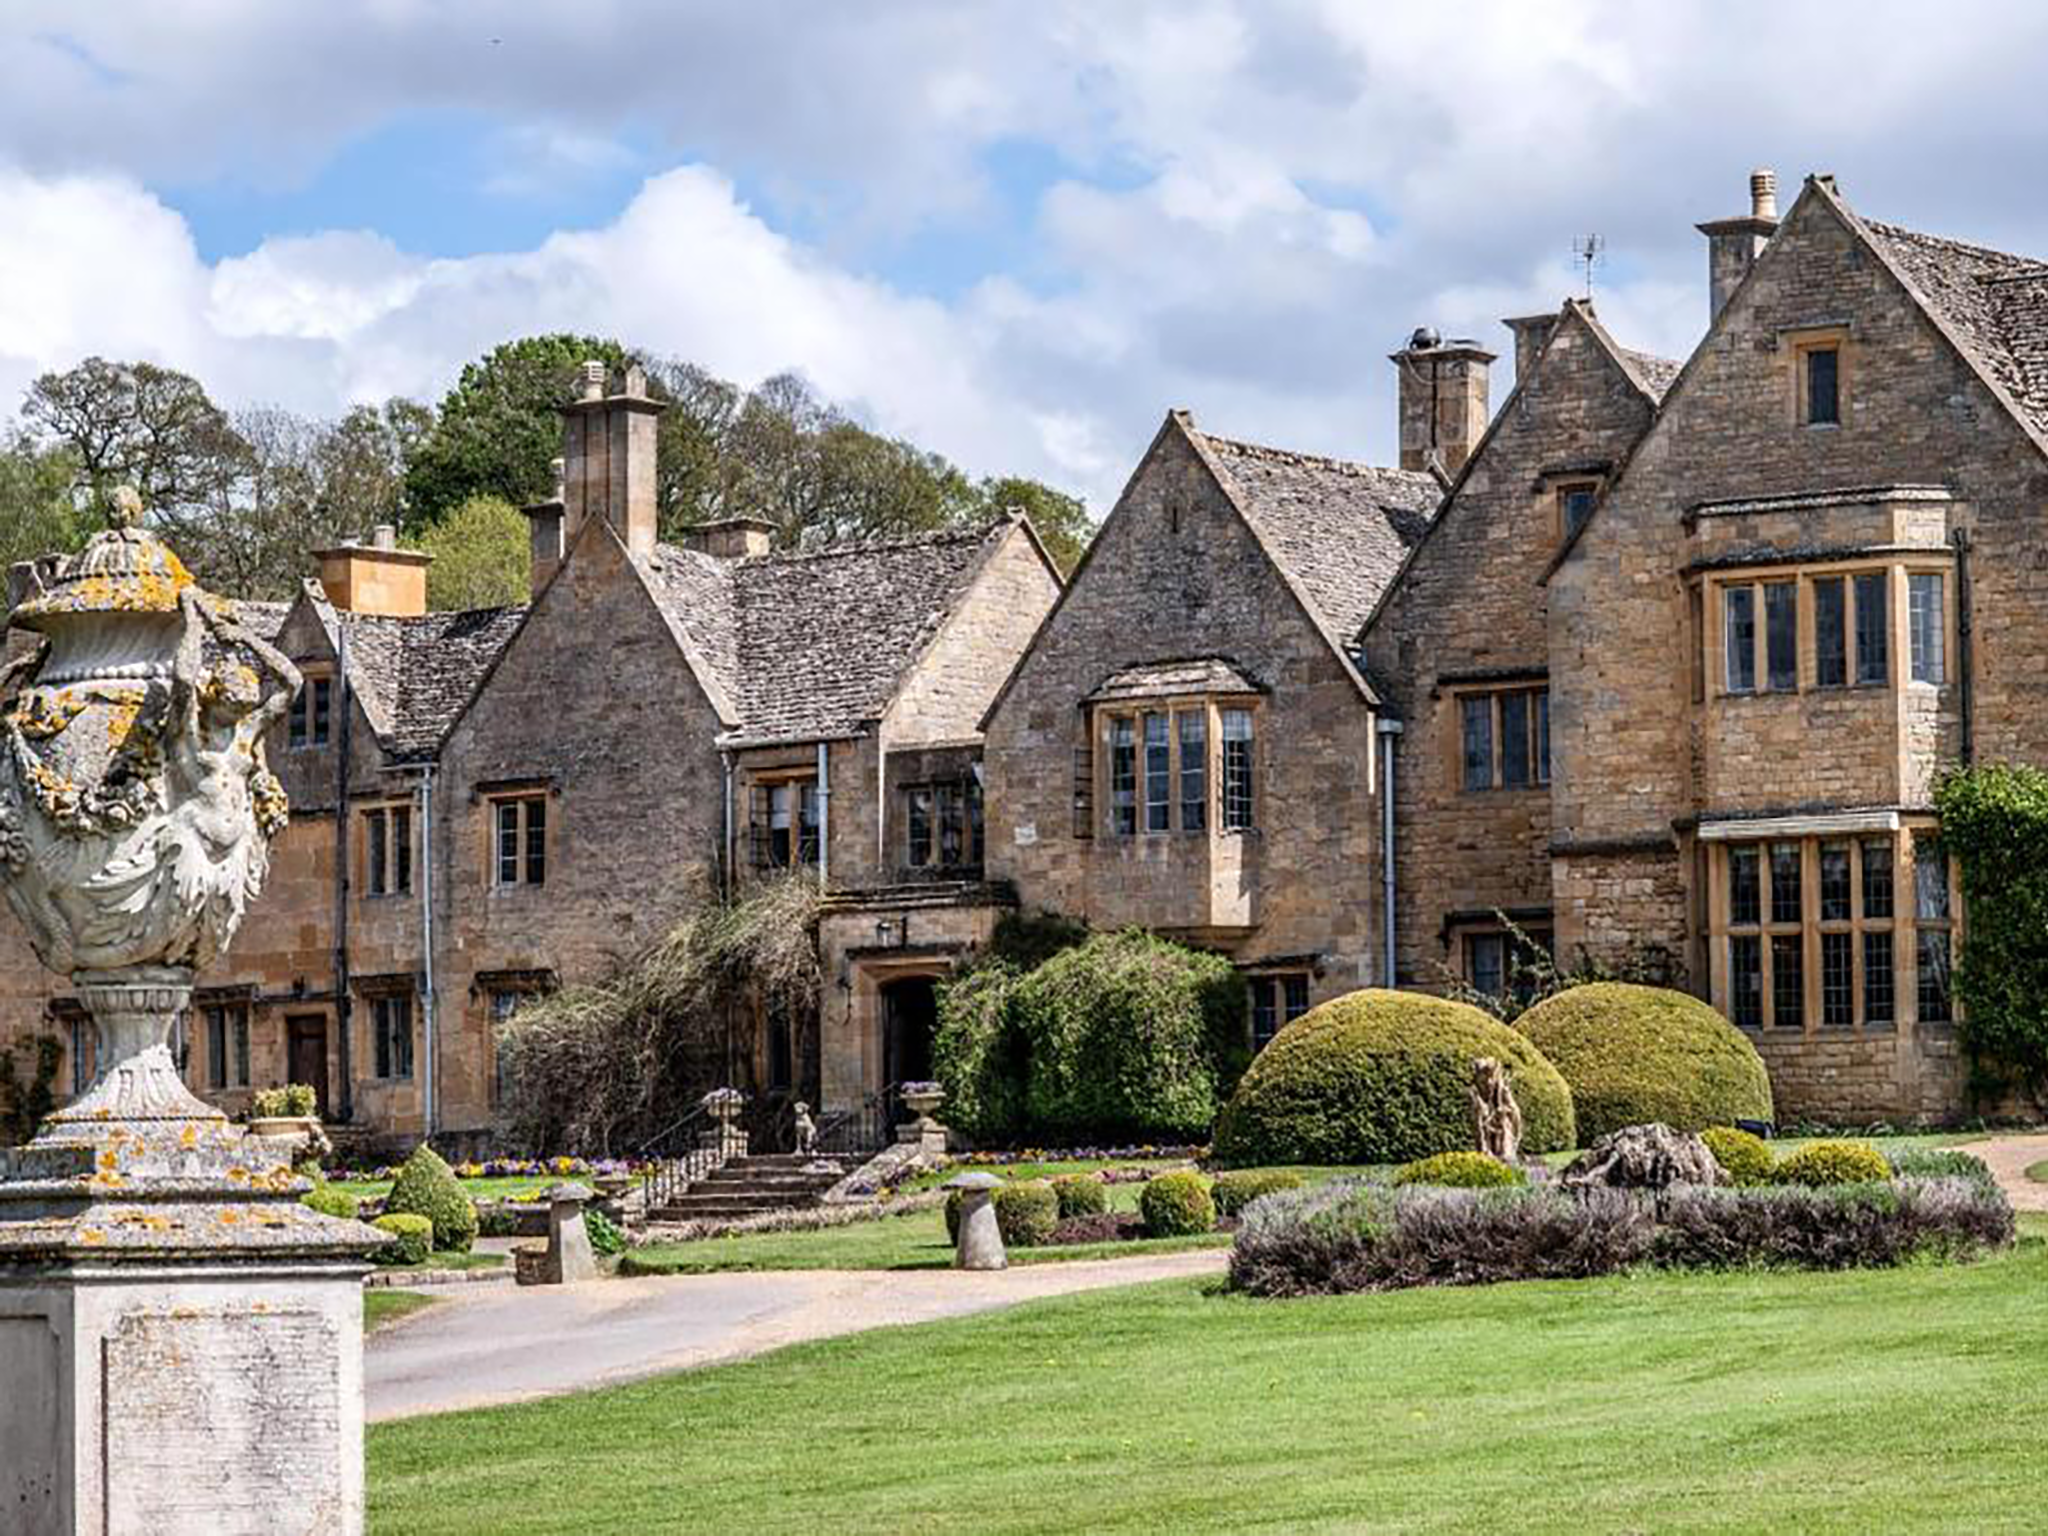 From glorious fireplaces to flagstone floors, this old manor cannot be faulted for its looks